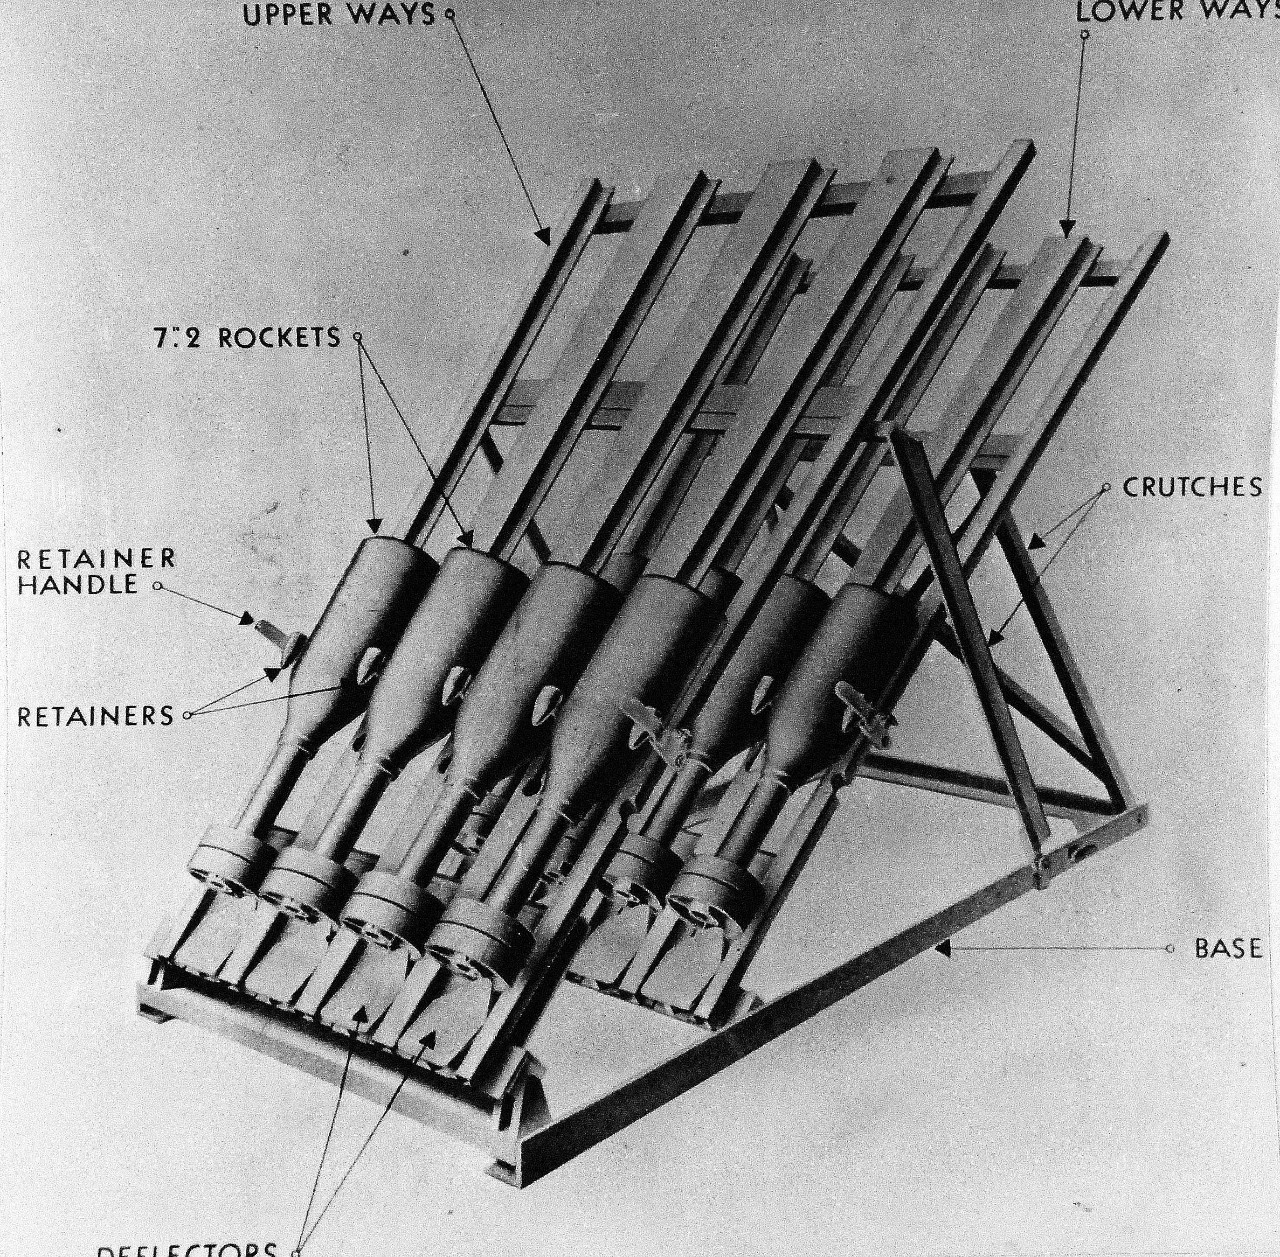 <p>80-G-701379: Battle of the Atlantic: Weapons: Mousetrap. Mousetrap bomb projectors used in anti-submarine warfare. Photograph released October 25, 1945.&nbsp;</p>
